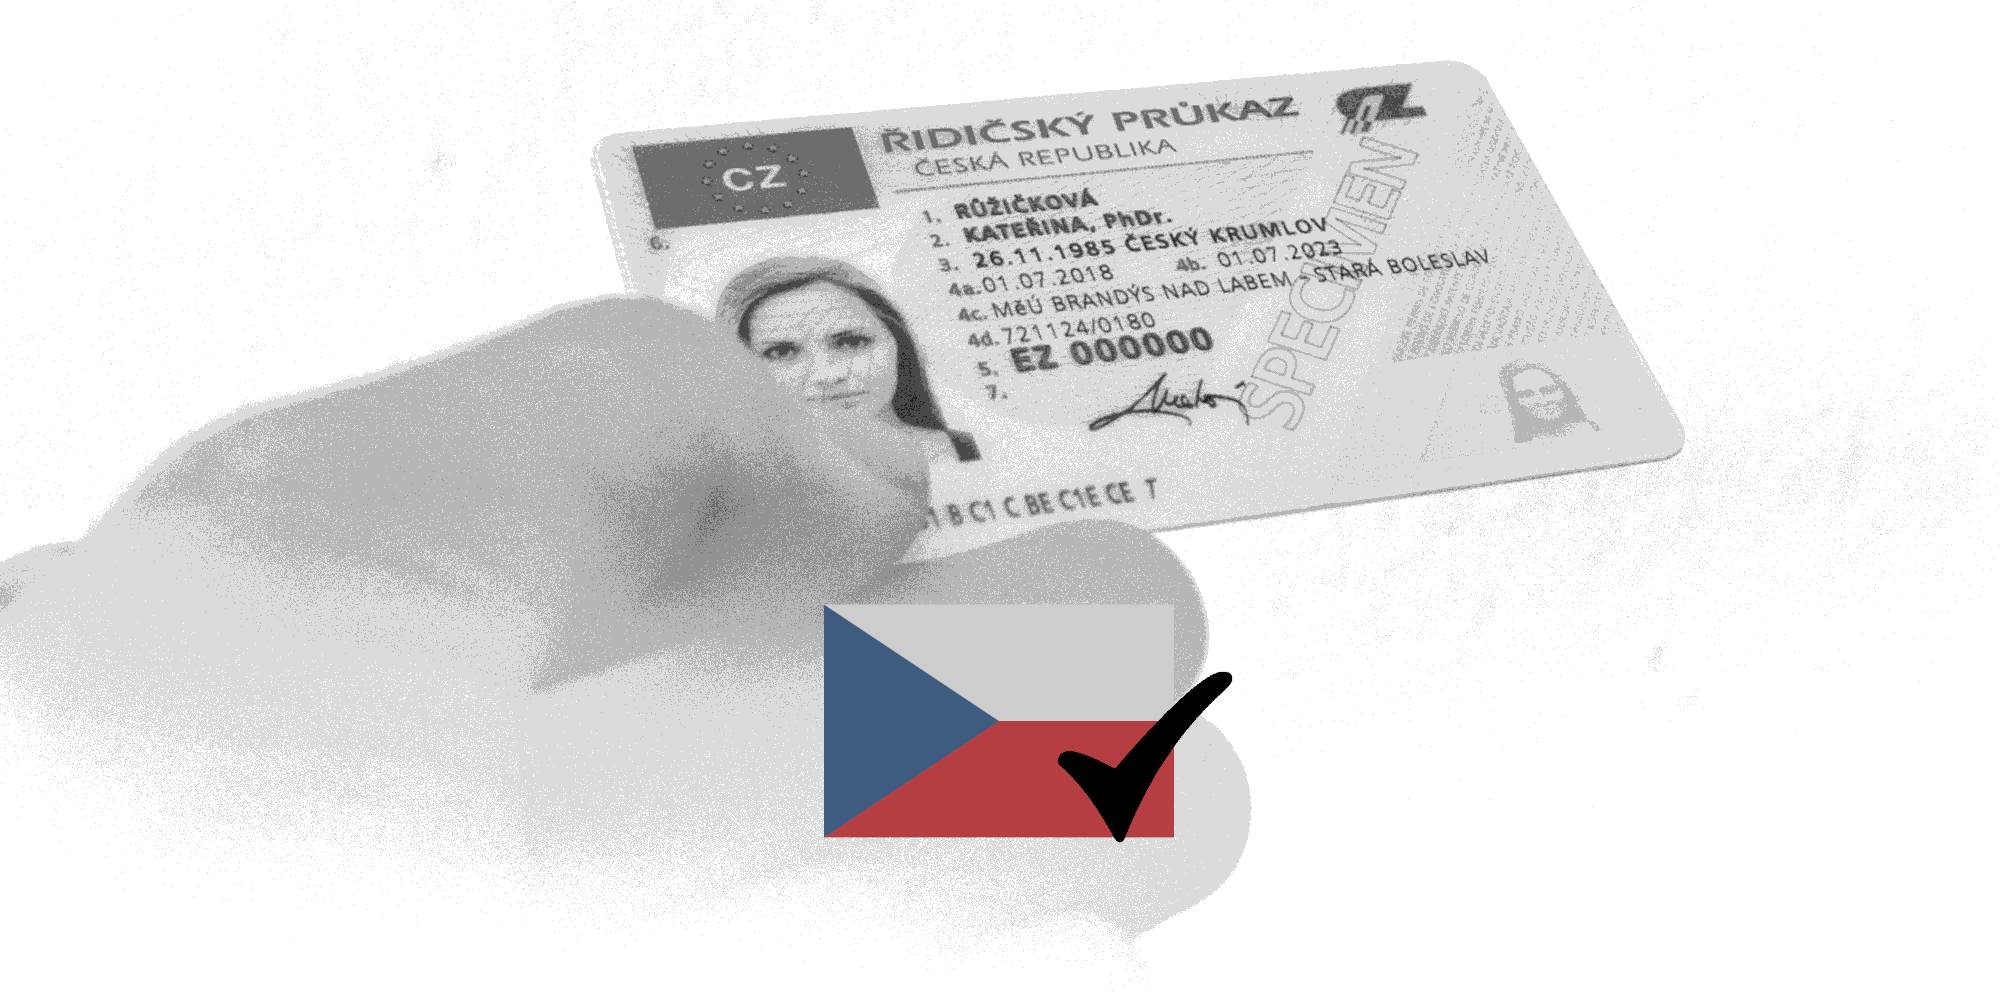 Issue of Czech driving licence, extension of driving licence categories